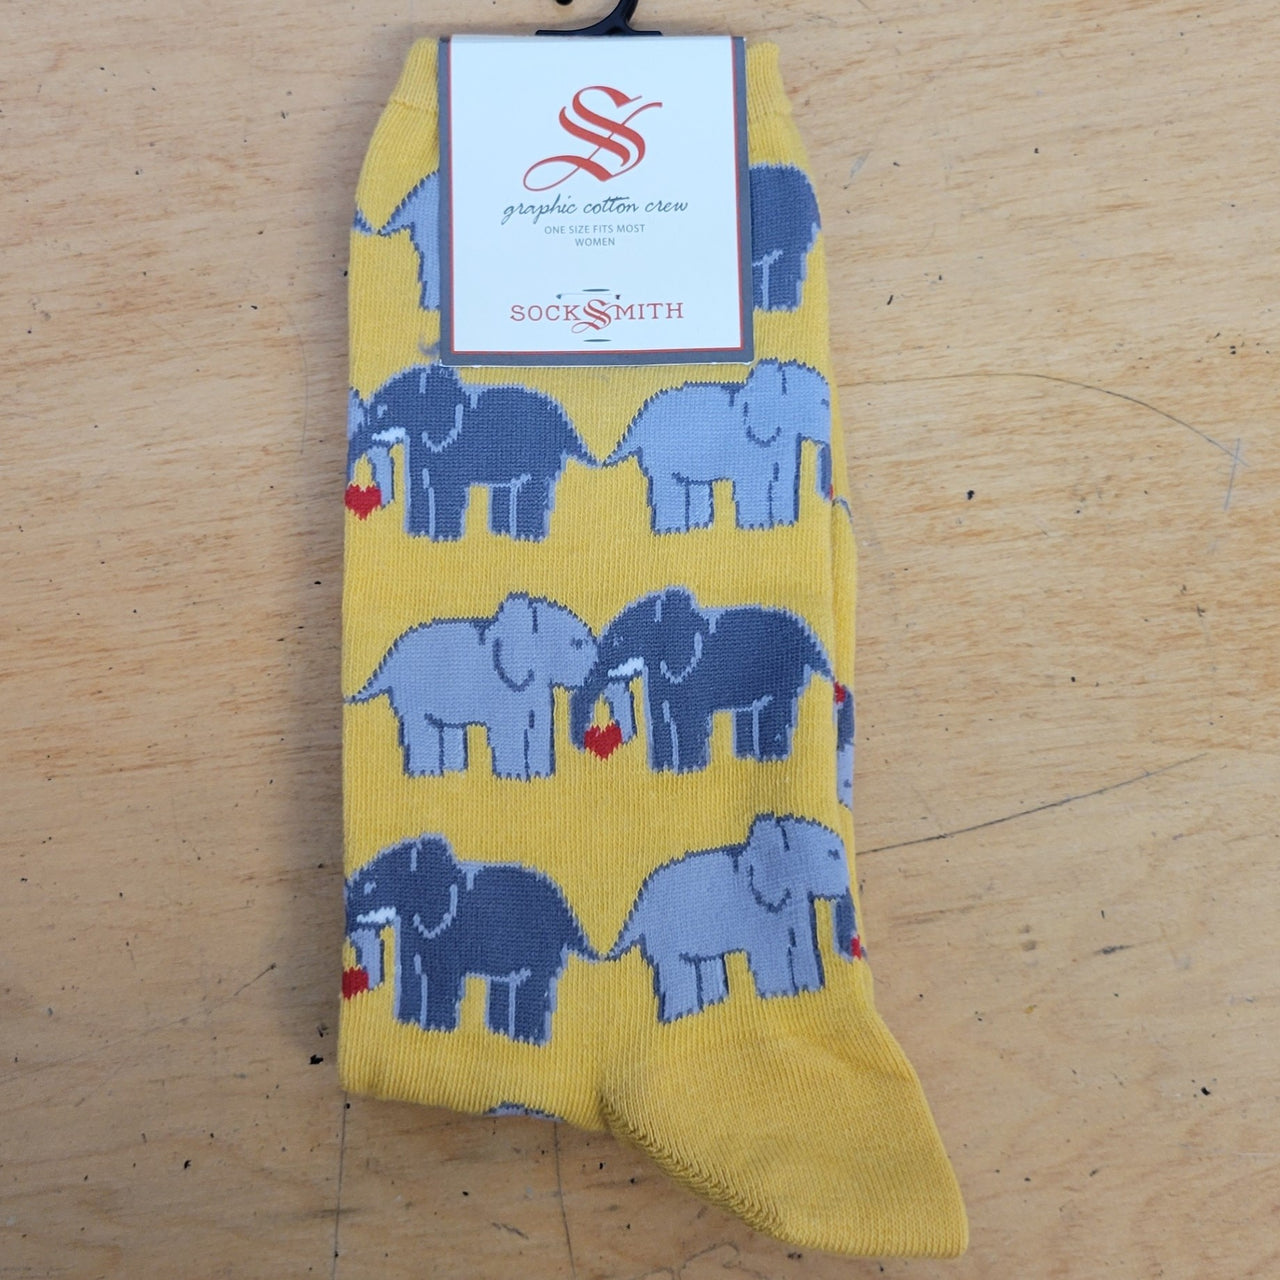 A pair of yellow socks with elephants on them.